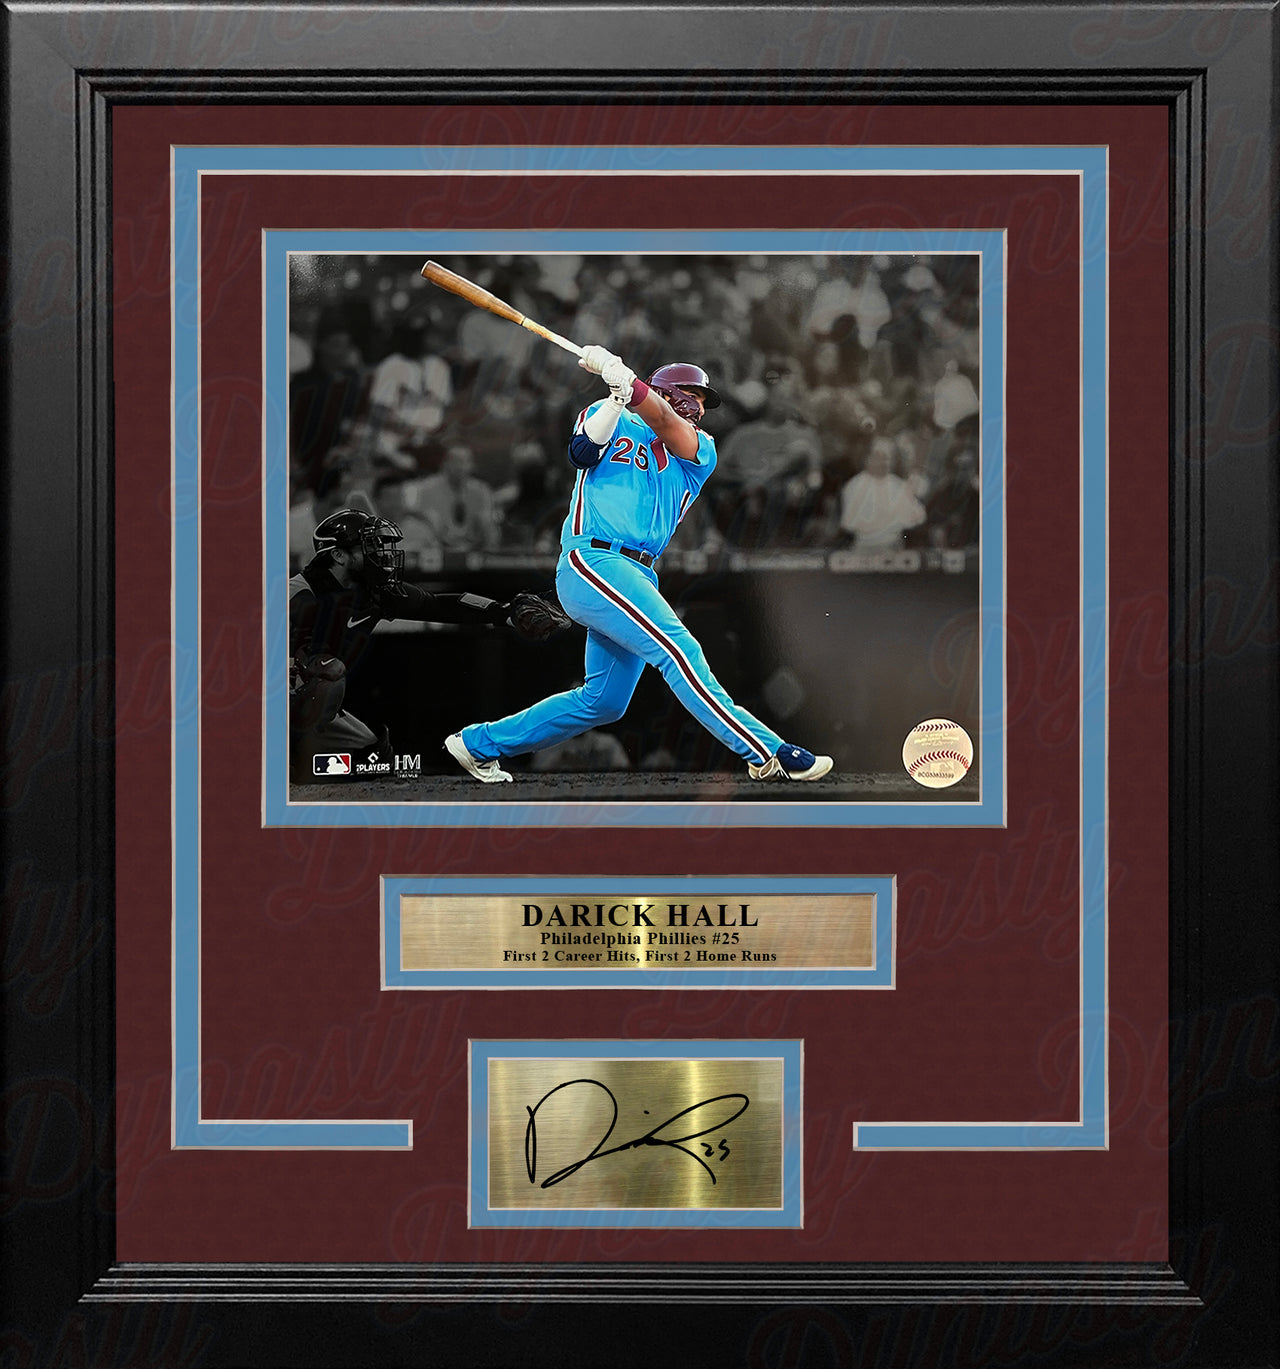 Darick Hall First Home Run Philadelphia Phillies 8x10 Framed Baseball Photo with Engraved Autograph - Dynasty Sports & Framing 